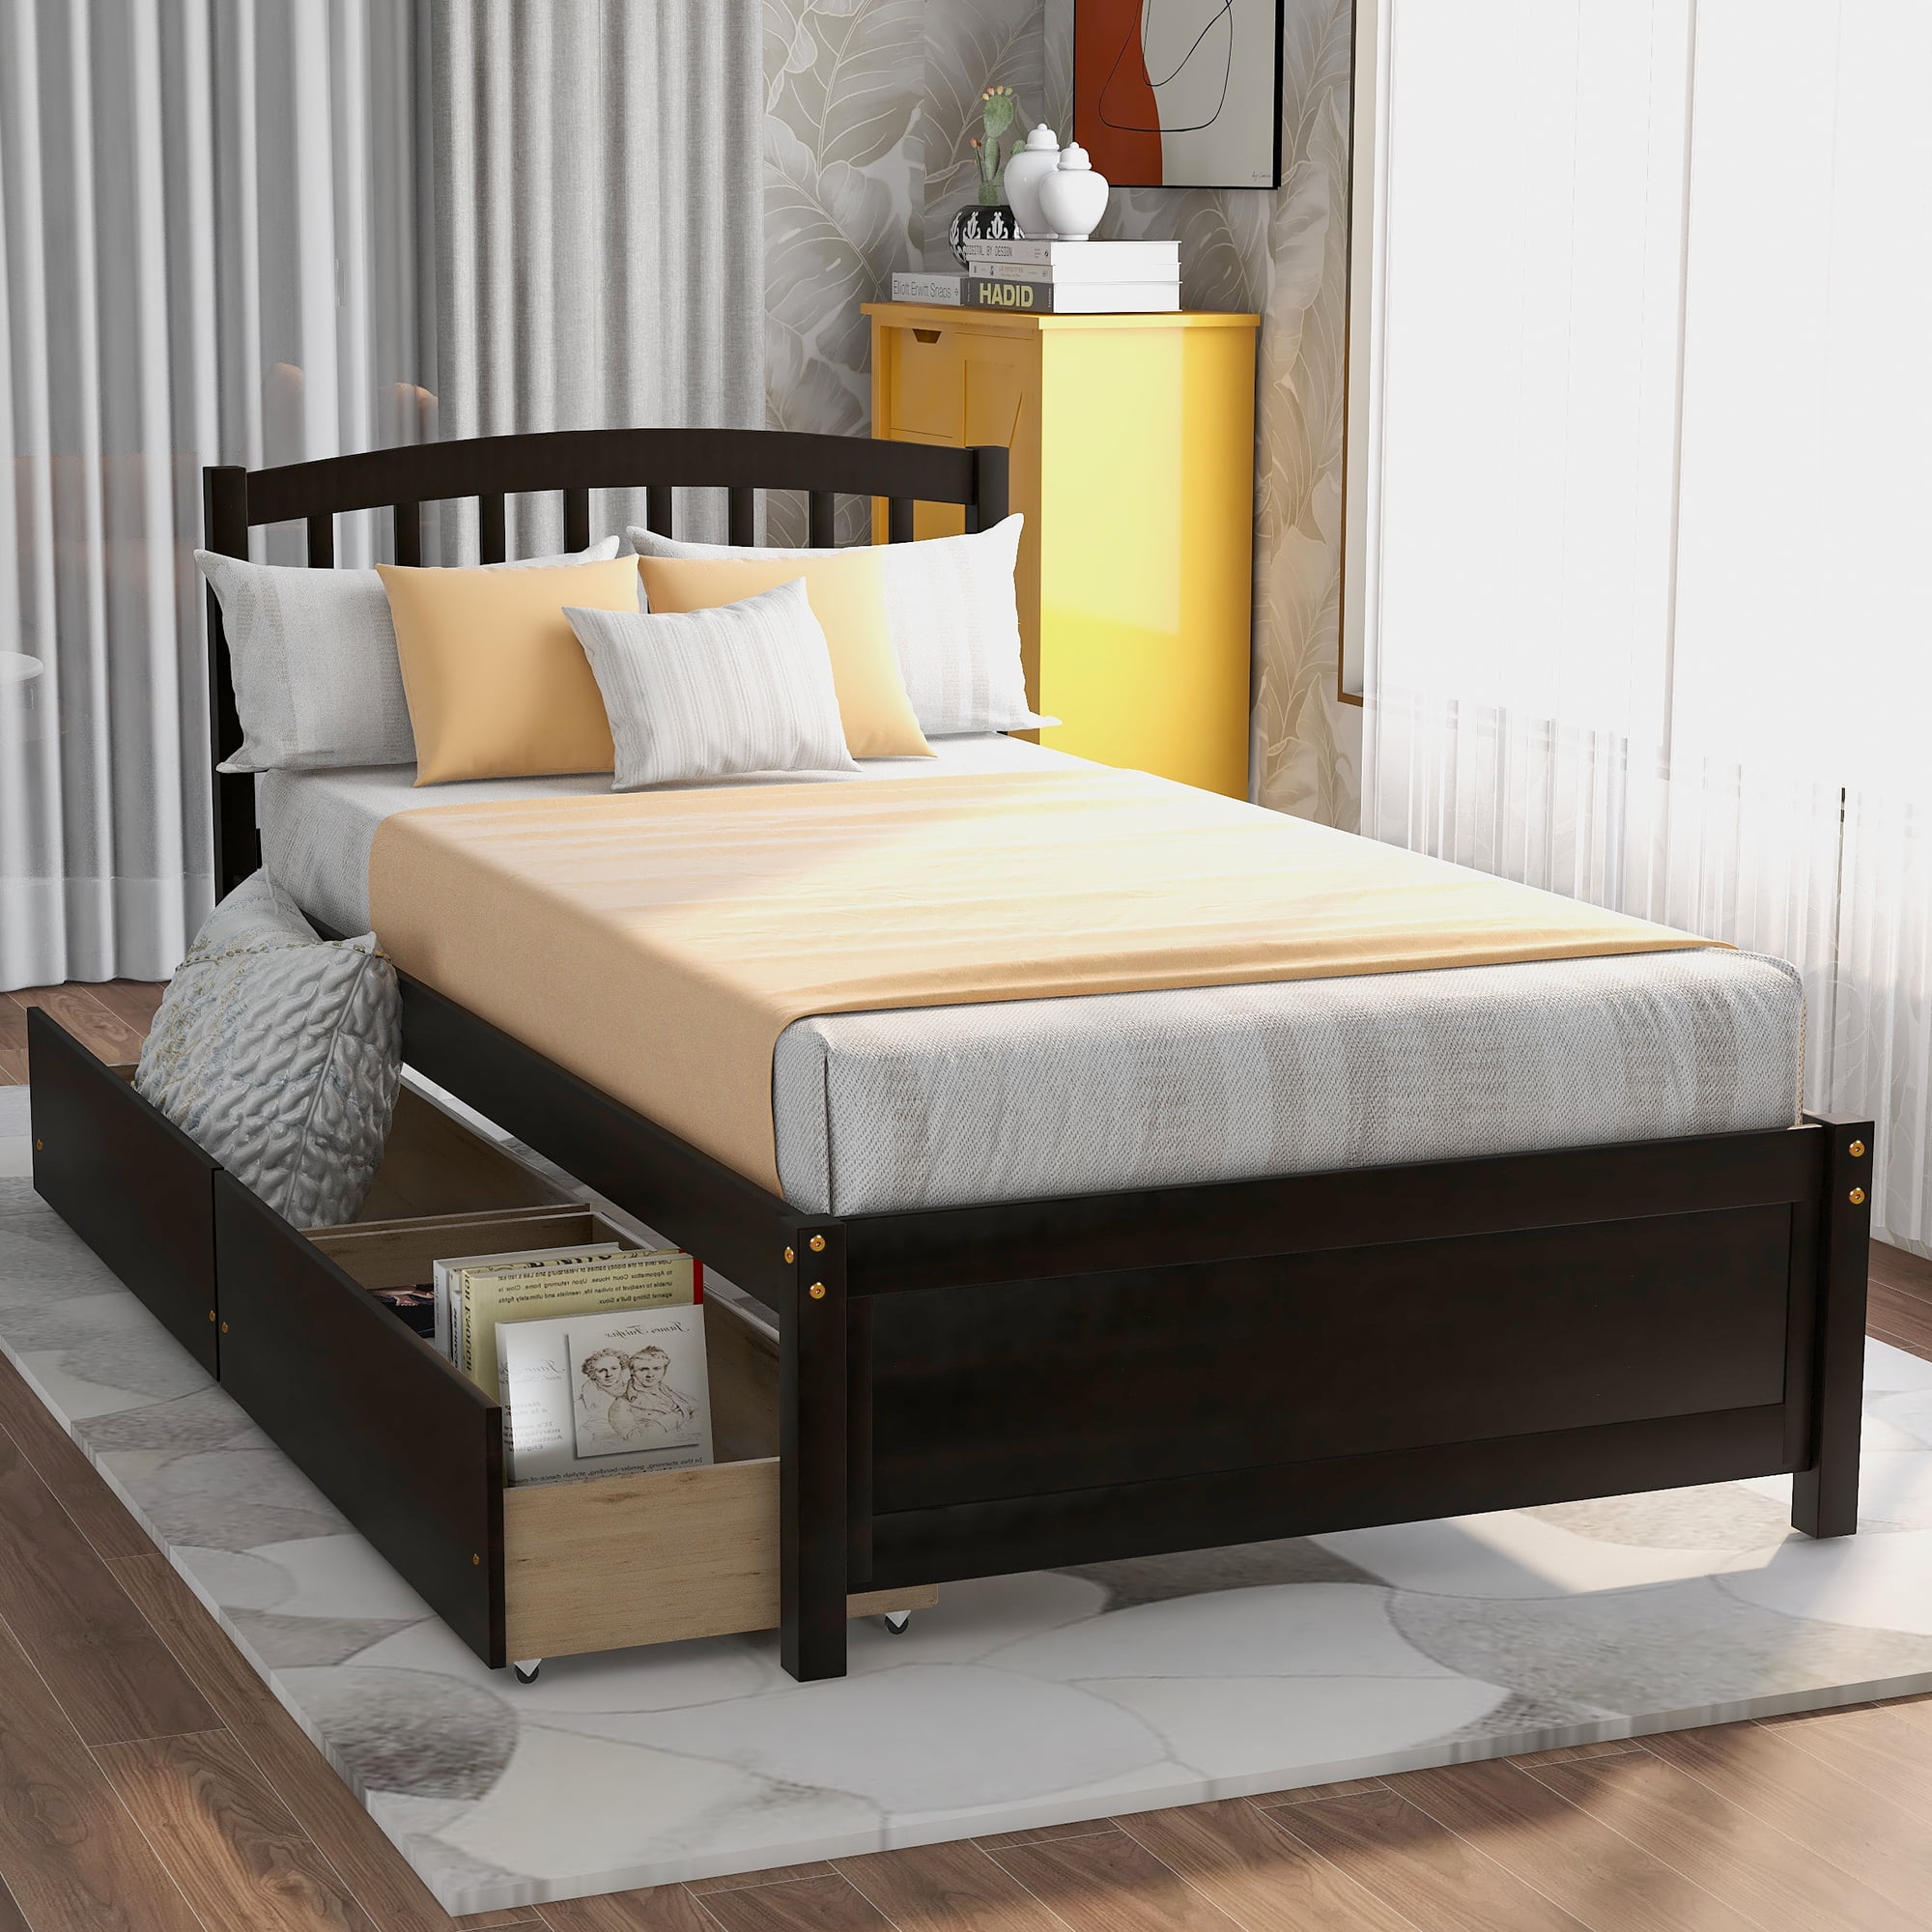 Modern Bedroom Wooden Frame Single Bed Cushion Frame W/2 Storage Drawers  200 Lbs